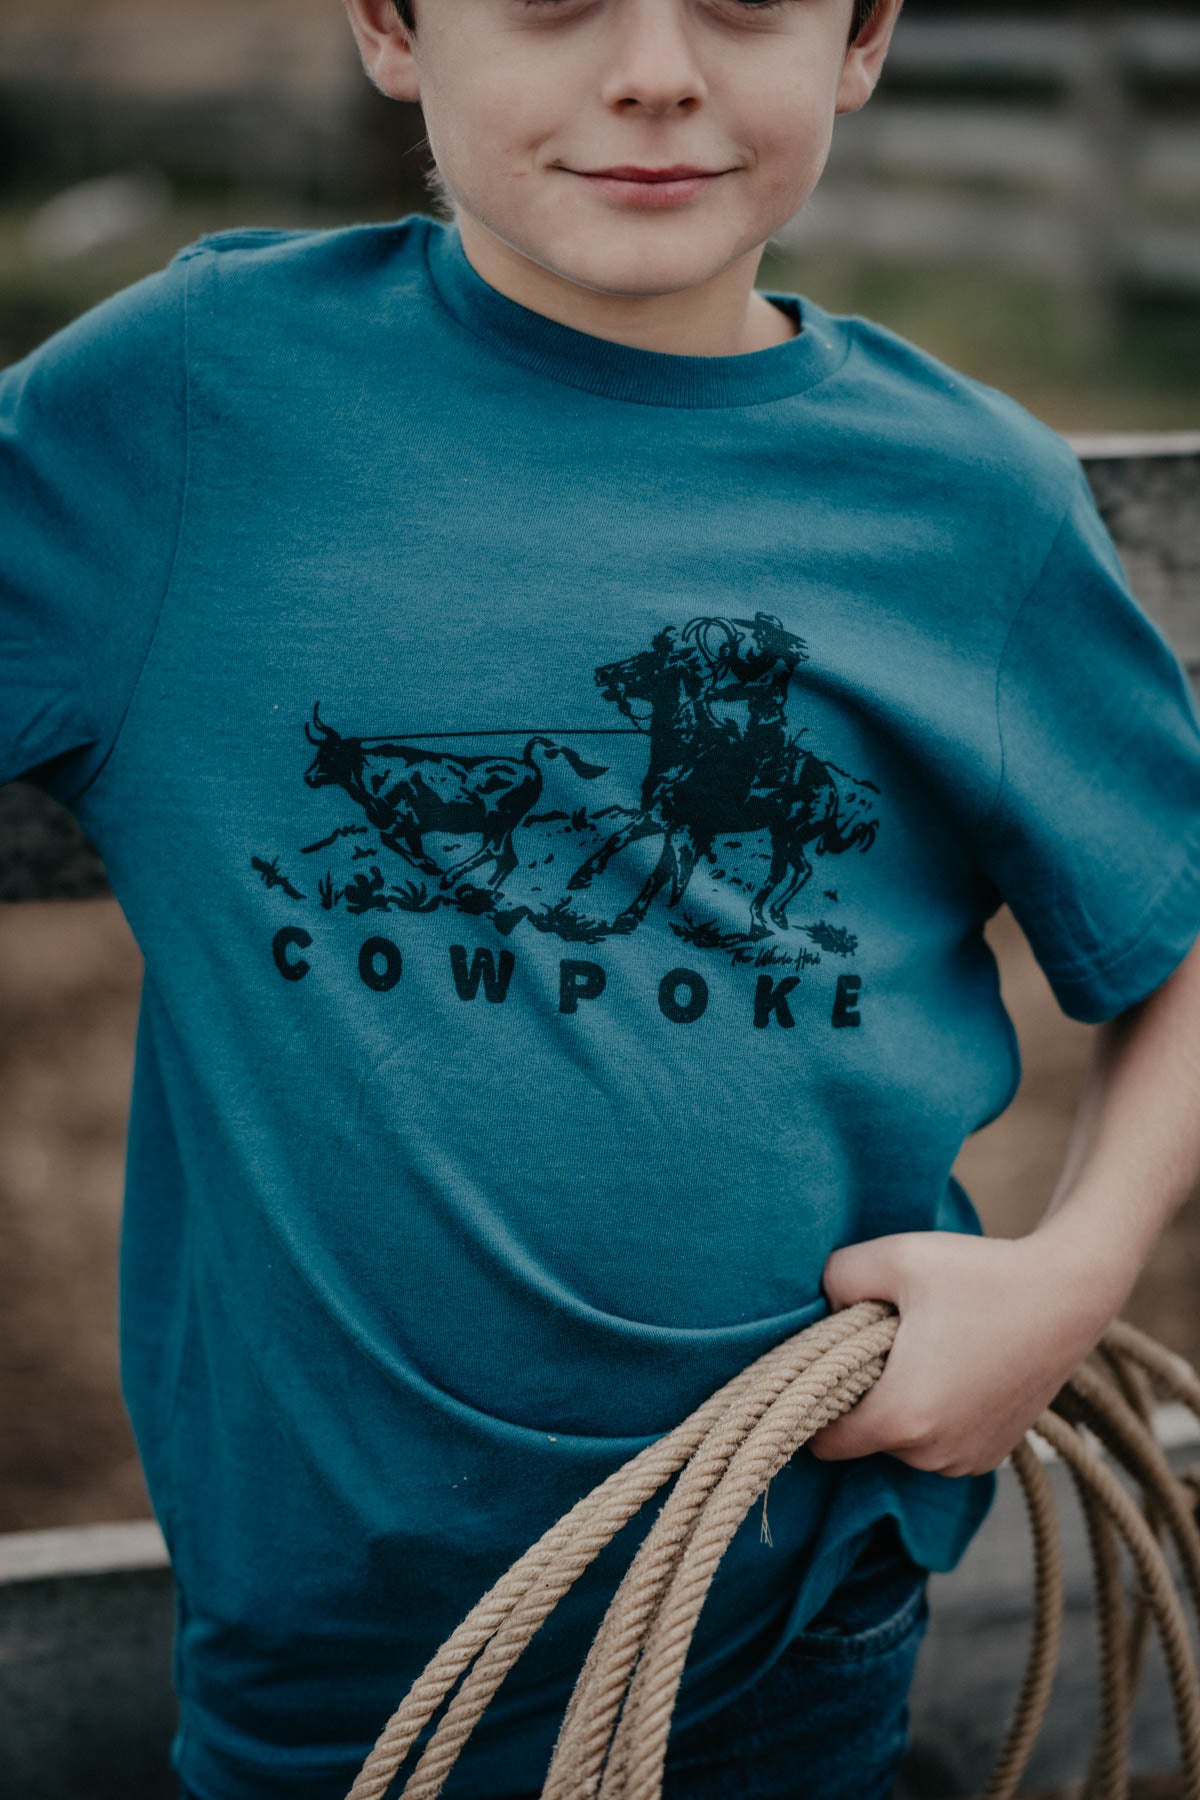 'Cowpoke' Kids Teal Graphic T-shirt (2T to Youth M)